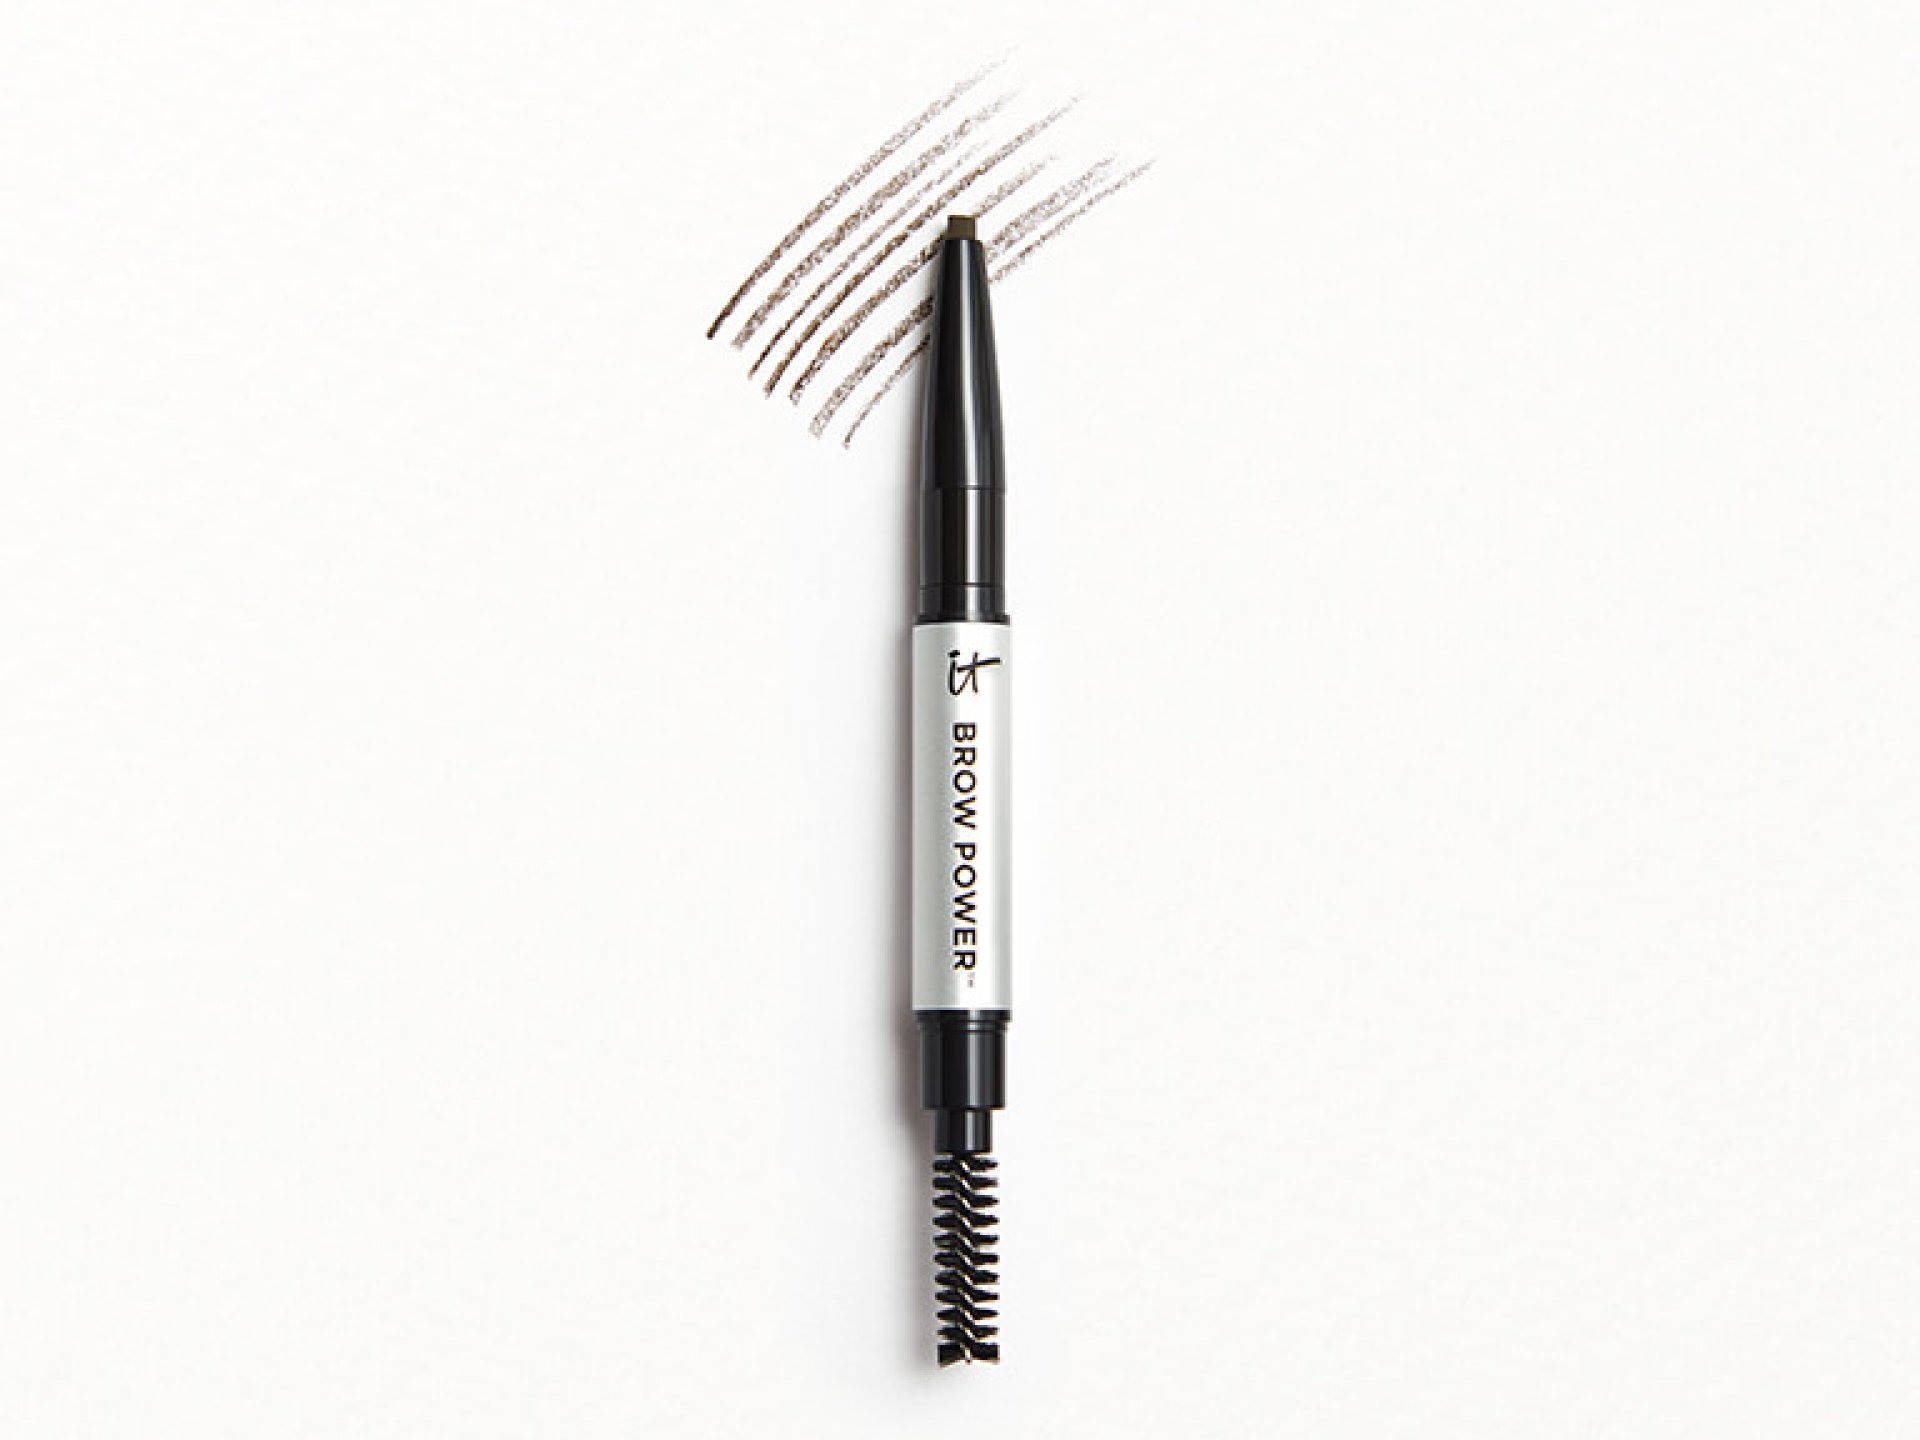 IT COSMETICS Brow Power Universal Defining Eyebrow Pencil in Universal Taupe